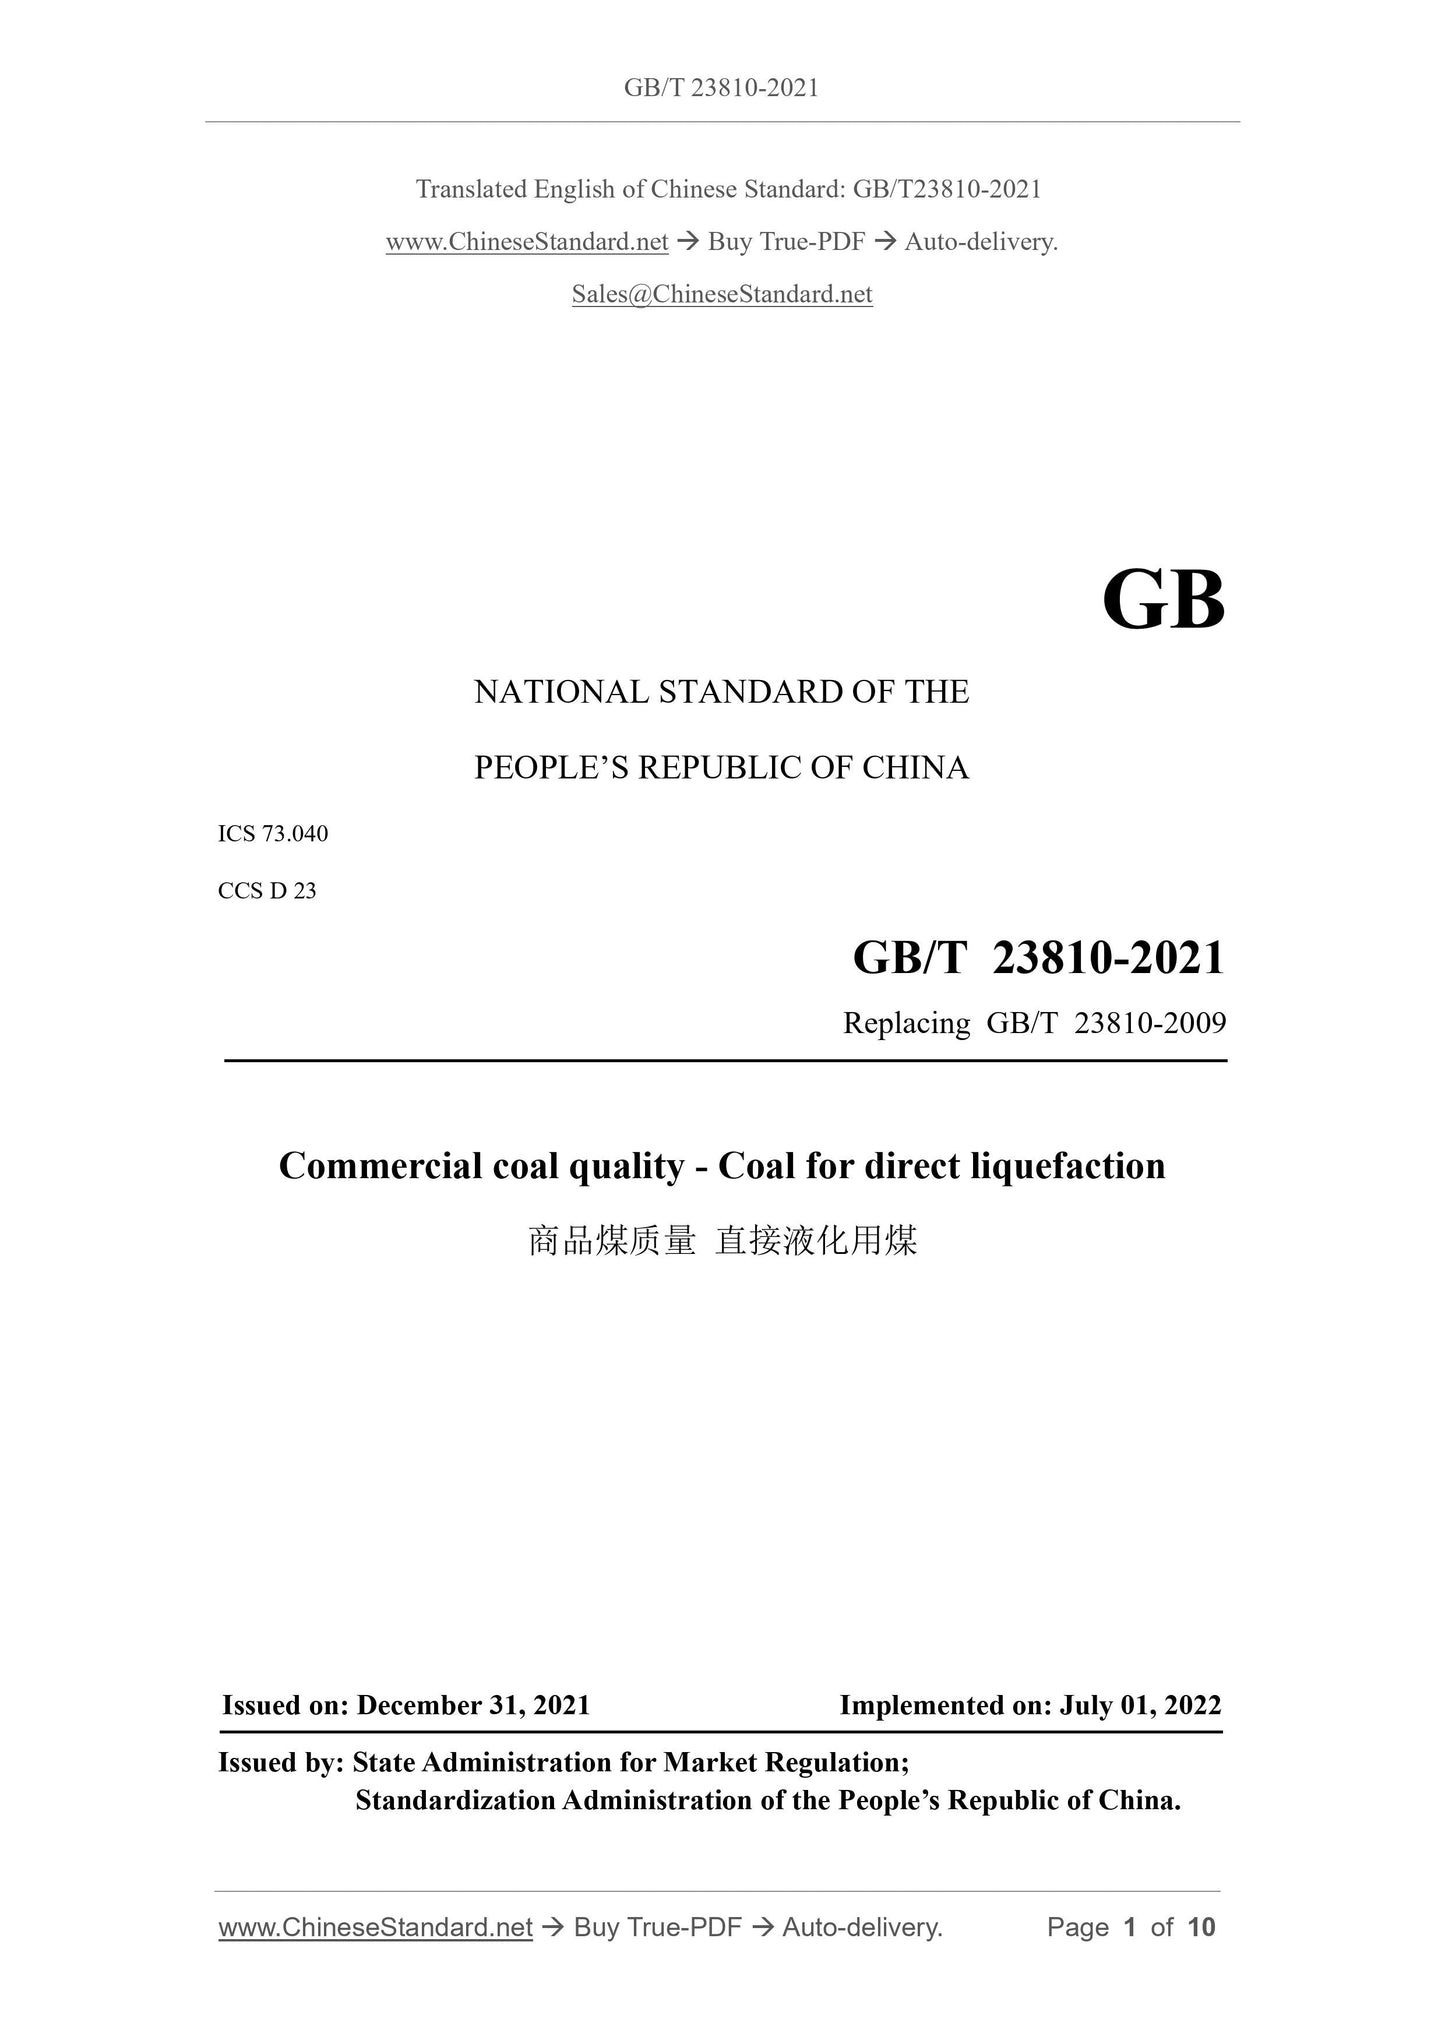 GB/T 23810-2021 Page 1